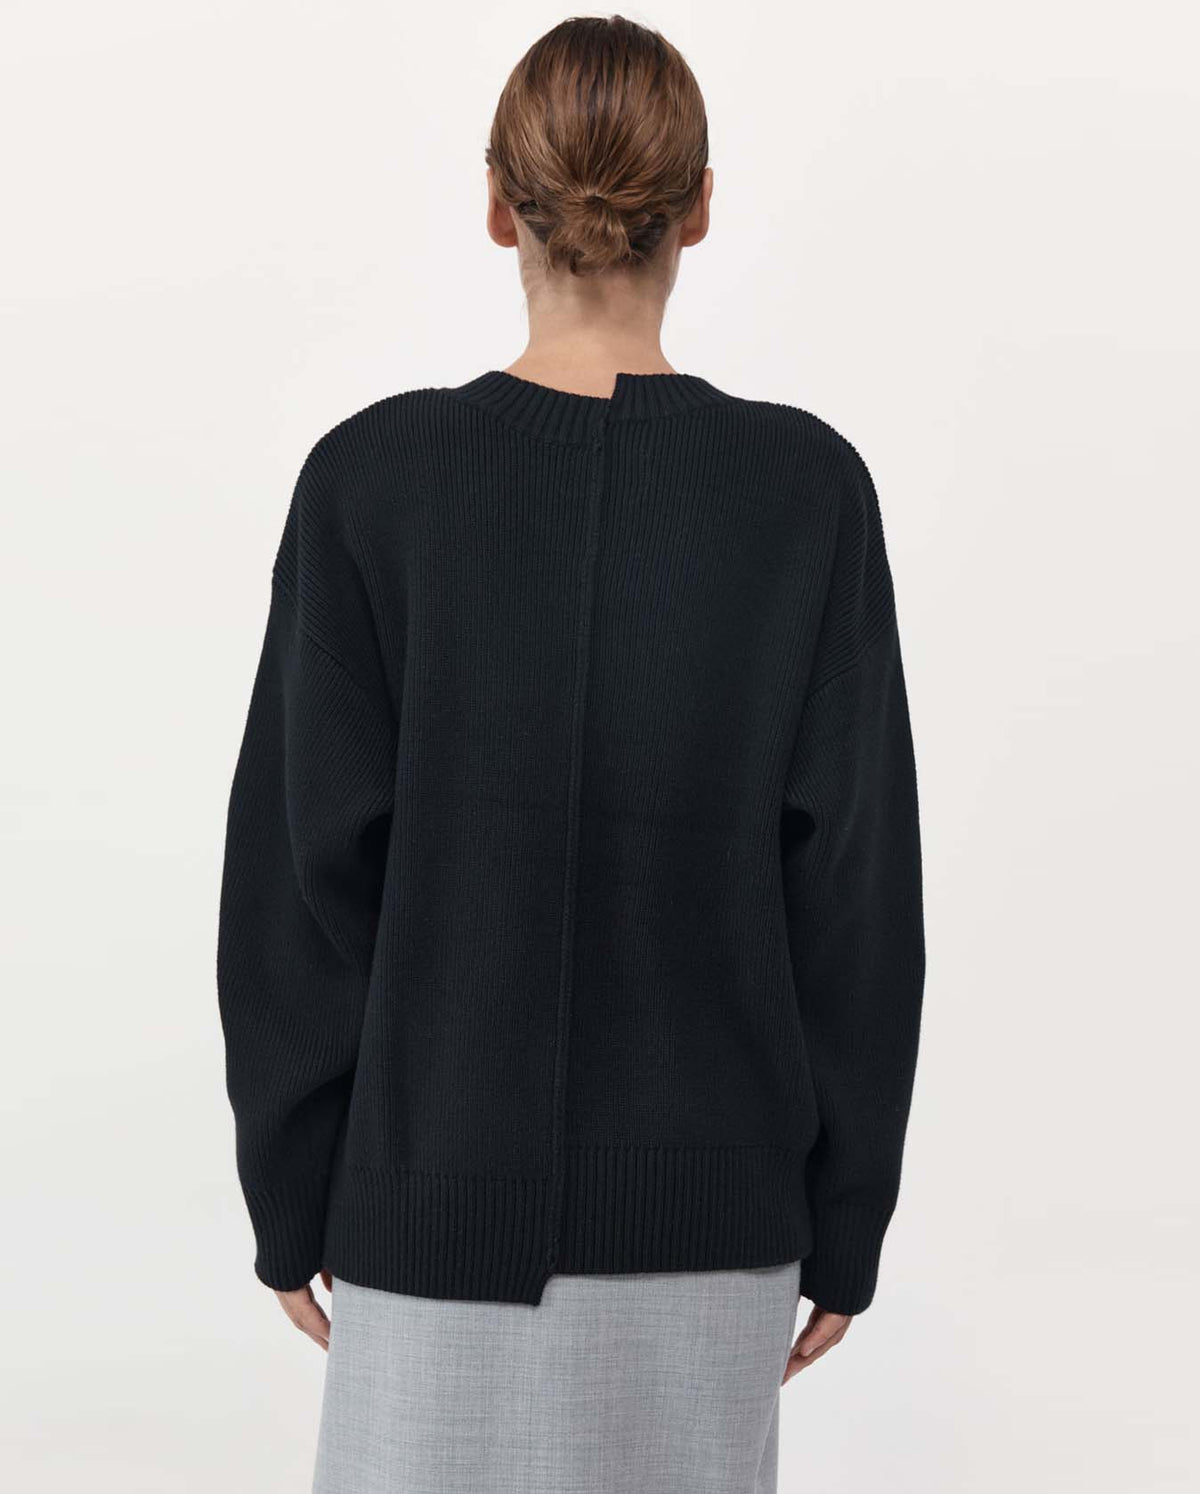 Deconstructed Pullover - Black